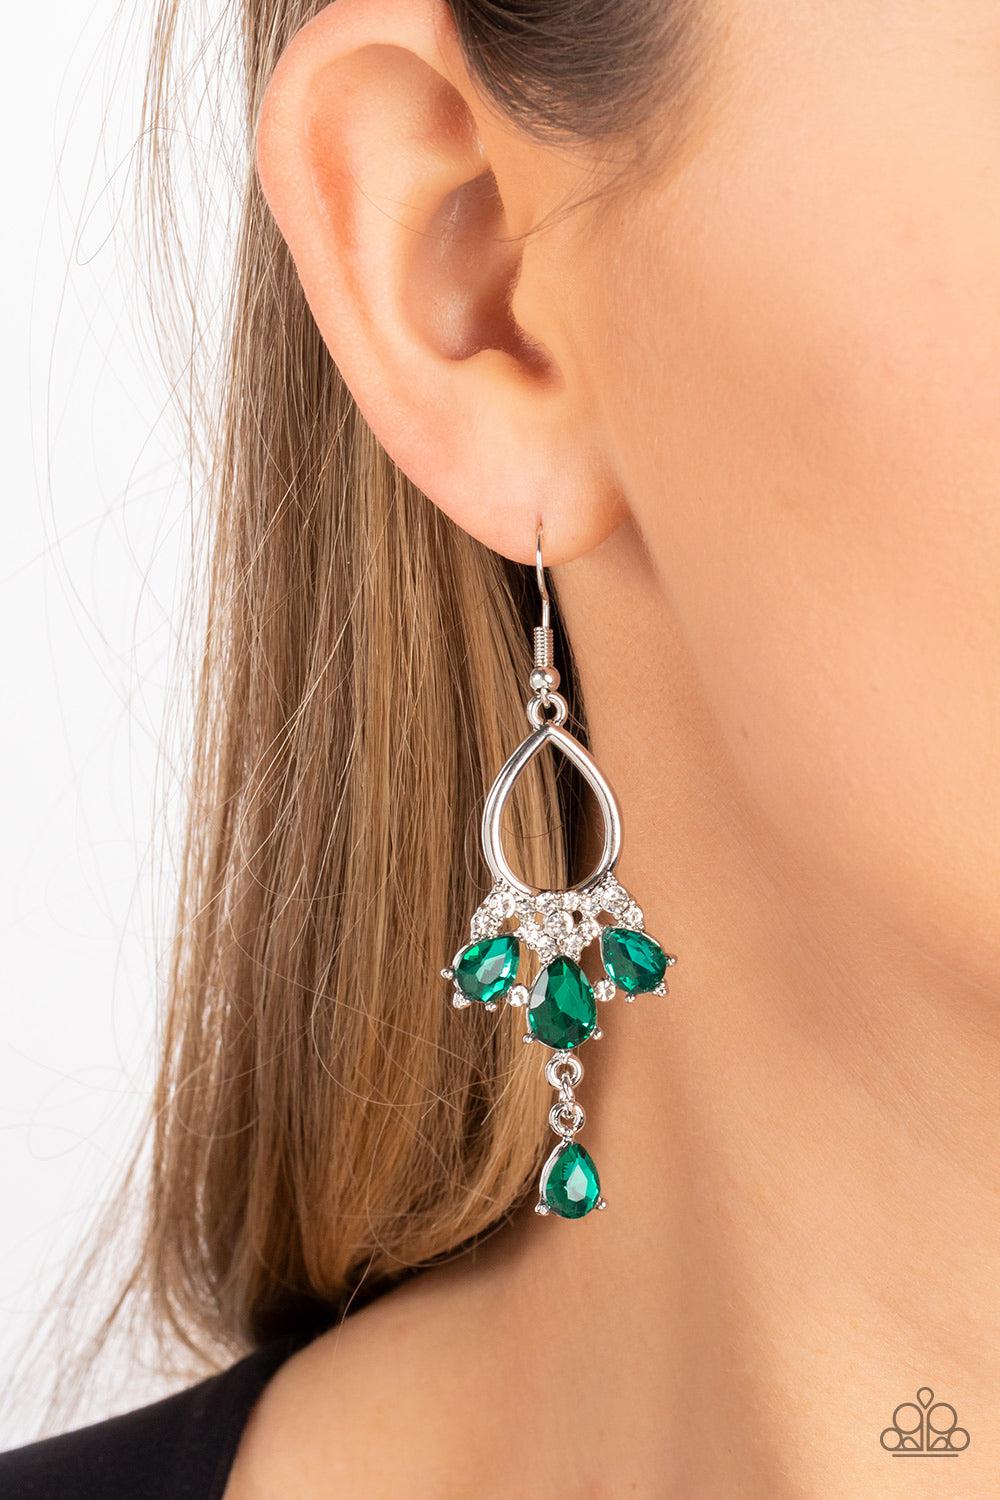 Coming in Clutch Green Rhinestone Earrings - Paparazzi Accessories- lightbox - CarasShop.com - $5 Jewelry by Cara Jewels